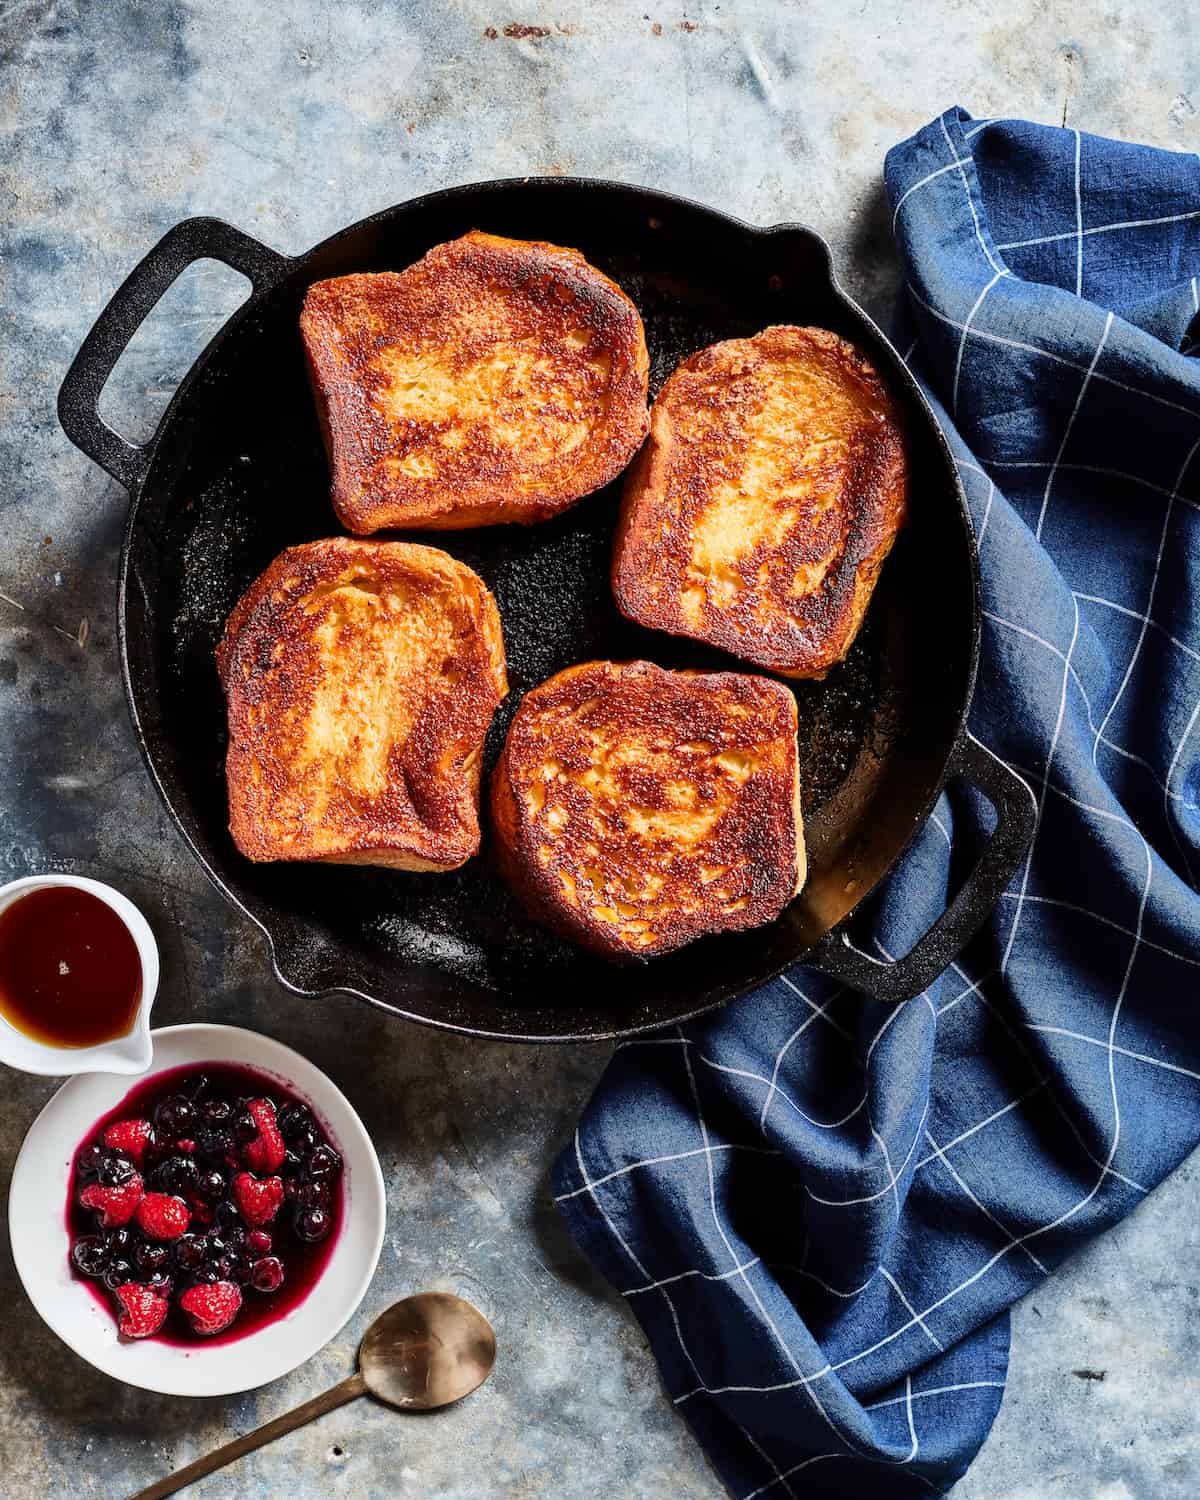 Caramelized French Toast in a skillet placed on a blue kitchen towel with a side serving of berry compote and maple syrup.